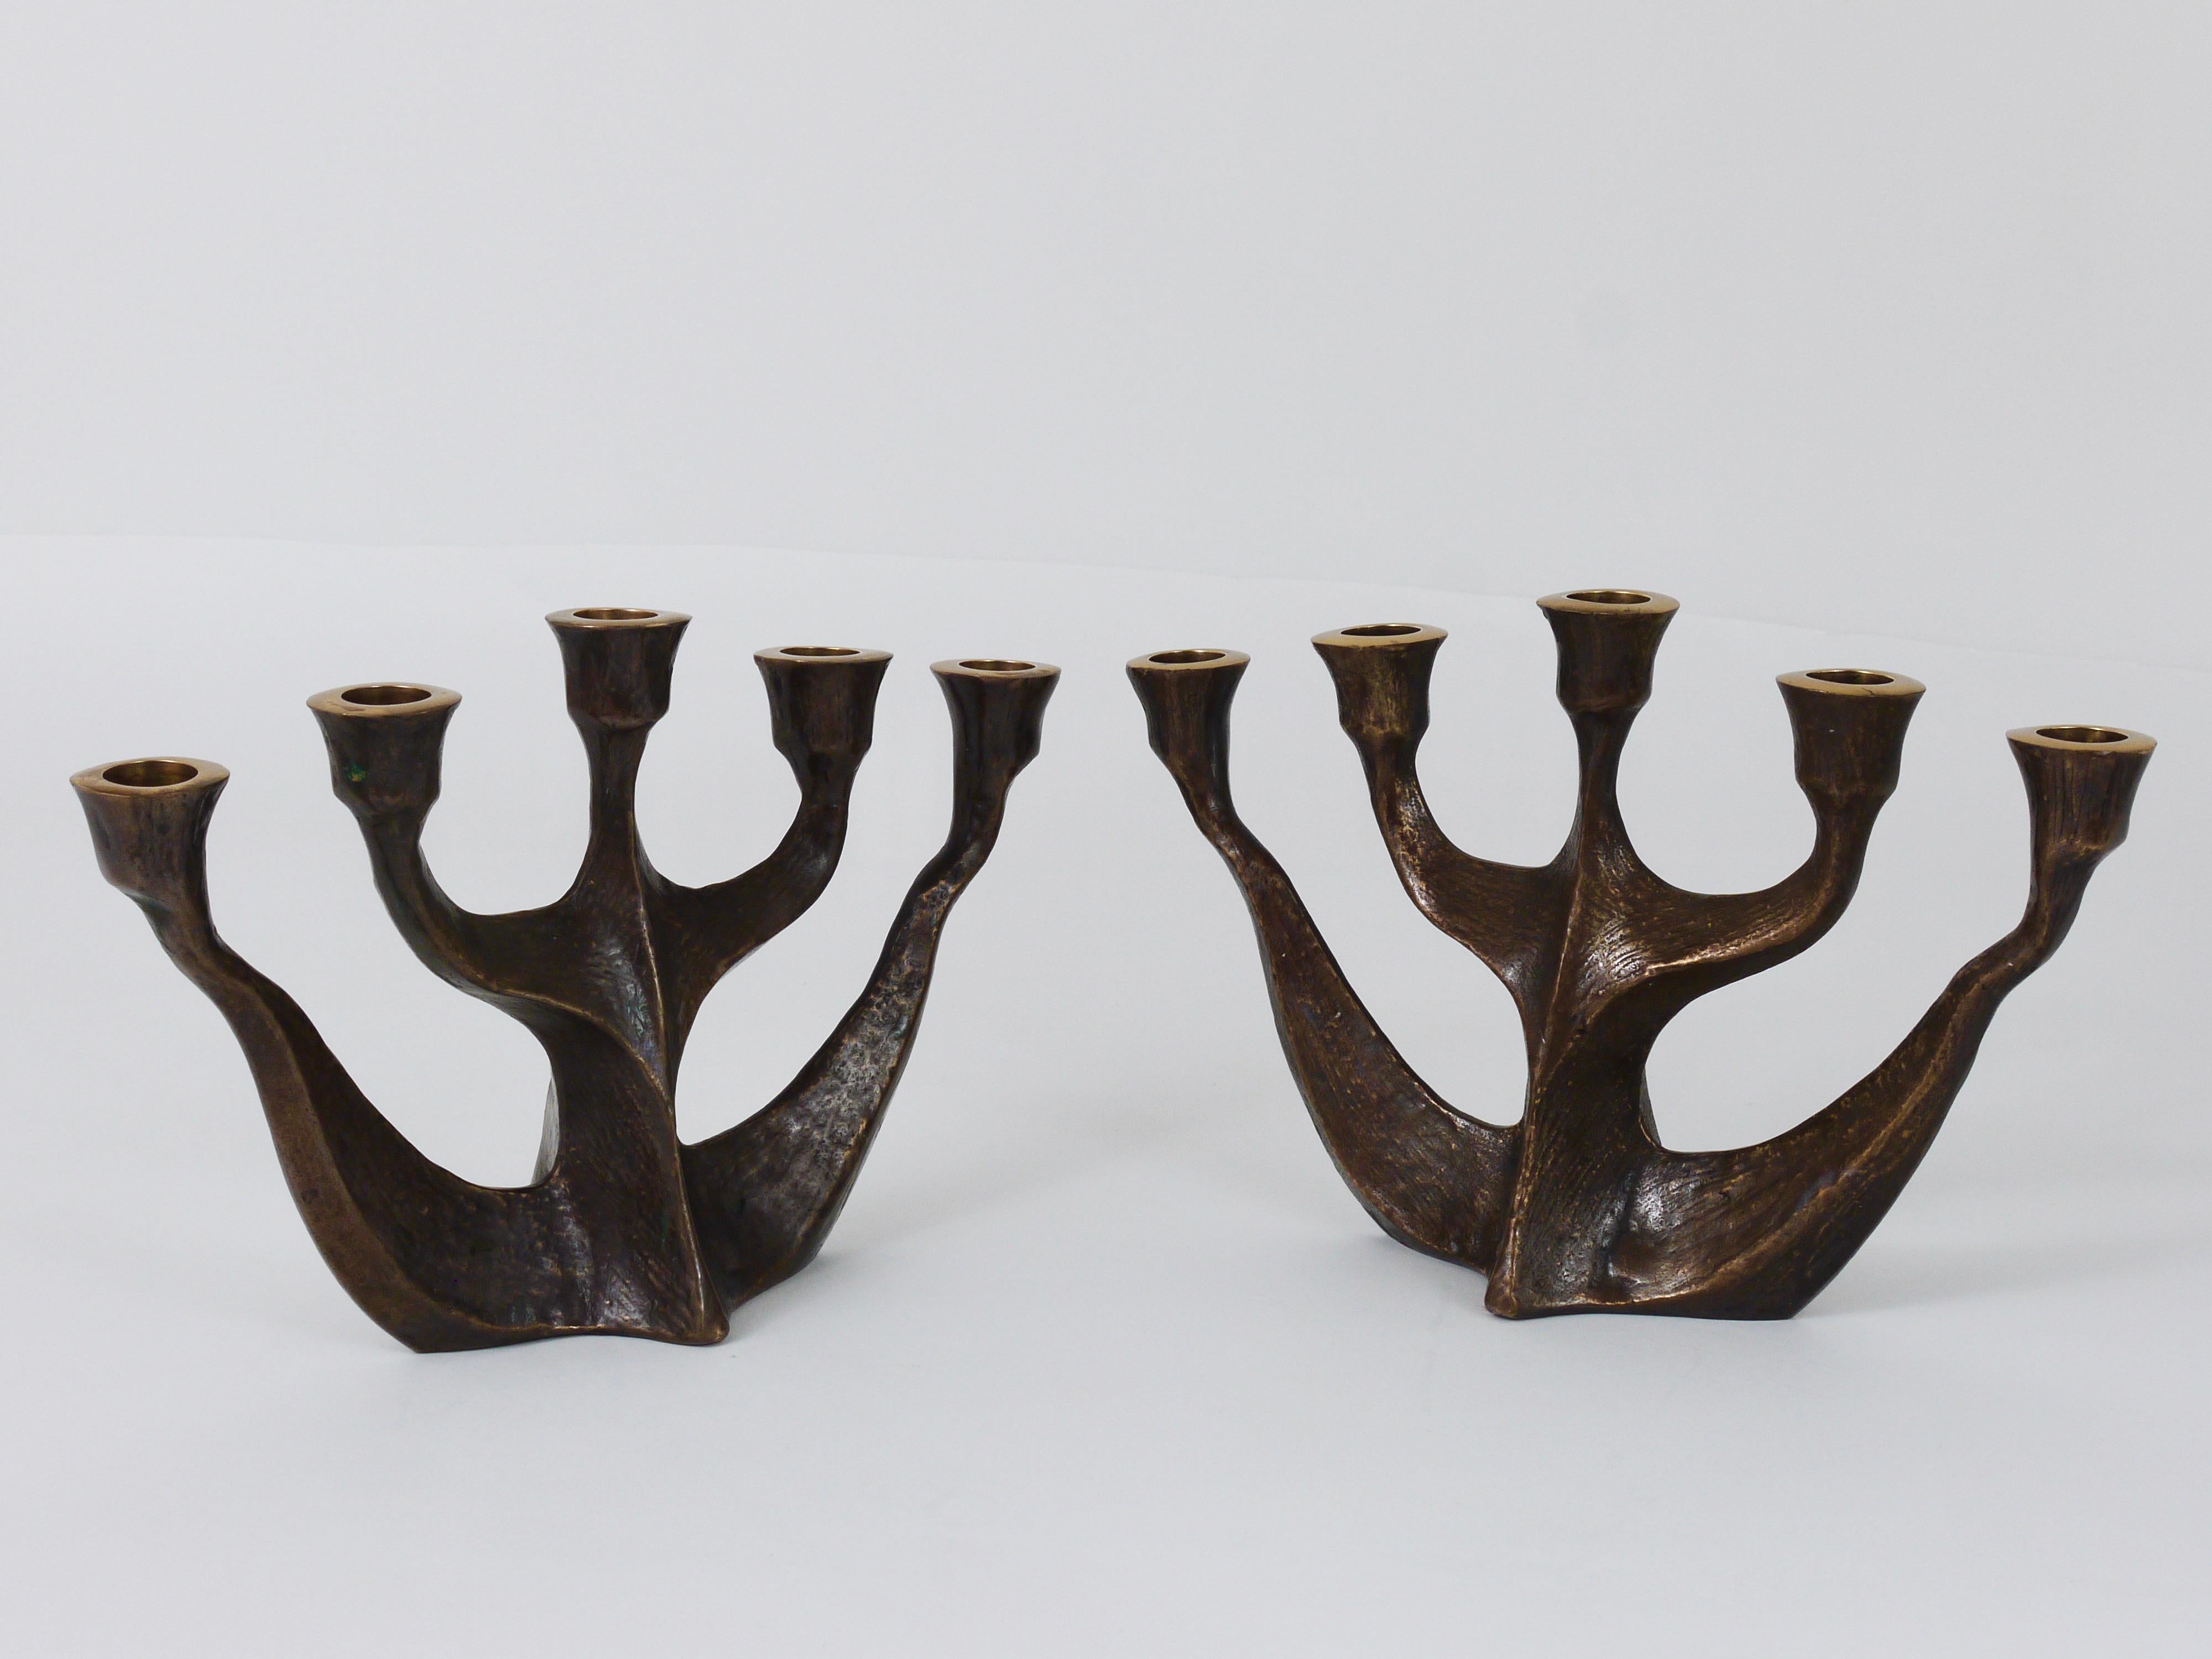 Up to two beautiful matching Brutalist five-arms candleholders, made of solid bronze from the 1960s. Designed and executed by Michael Harjes, Germany. In very good condition. There are two identical candleholders available, sold and priced per